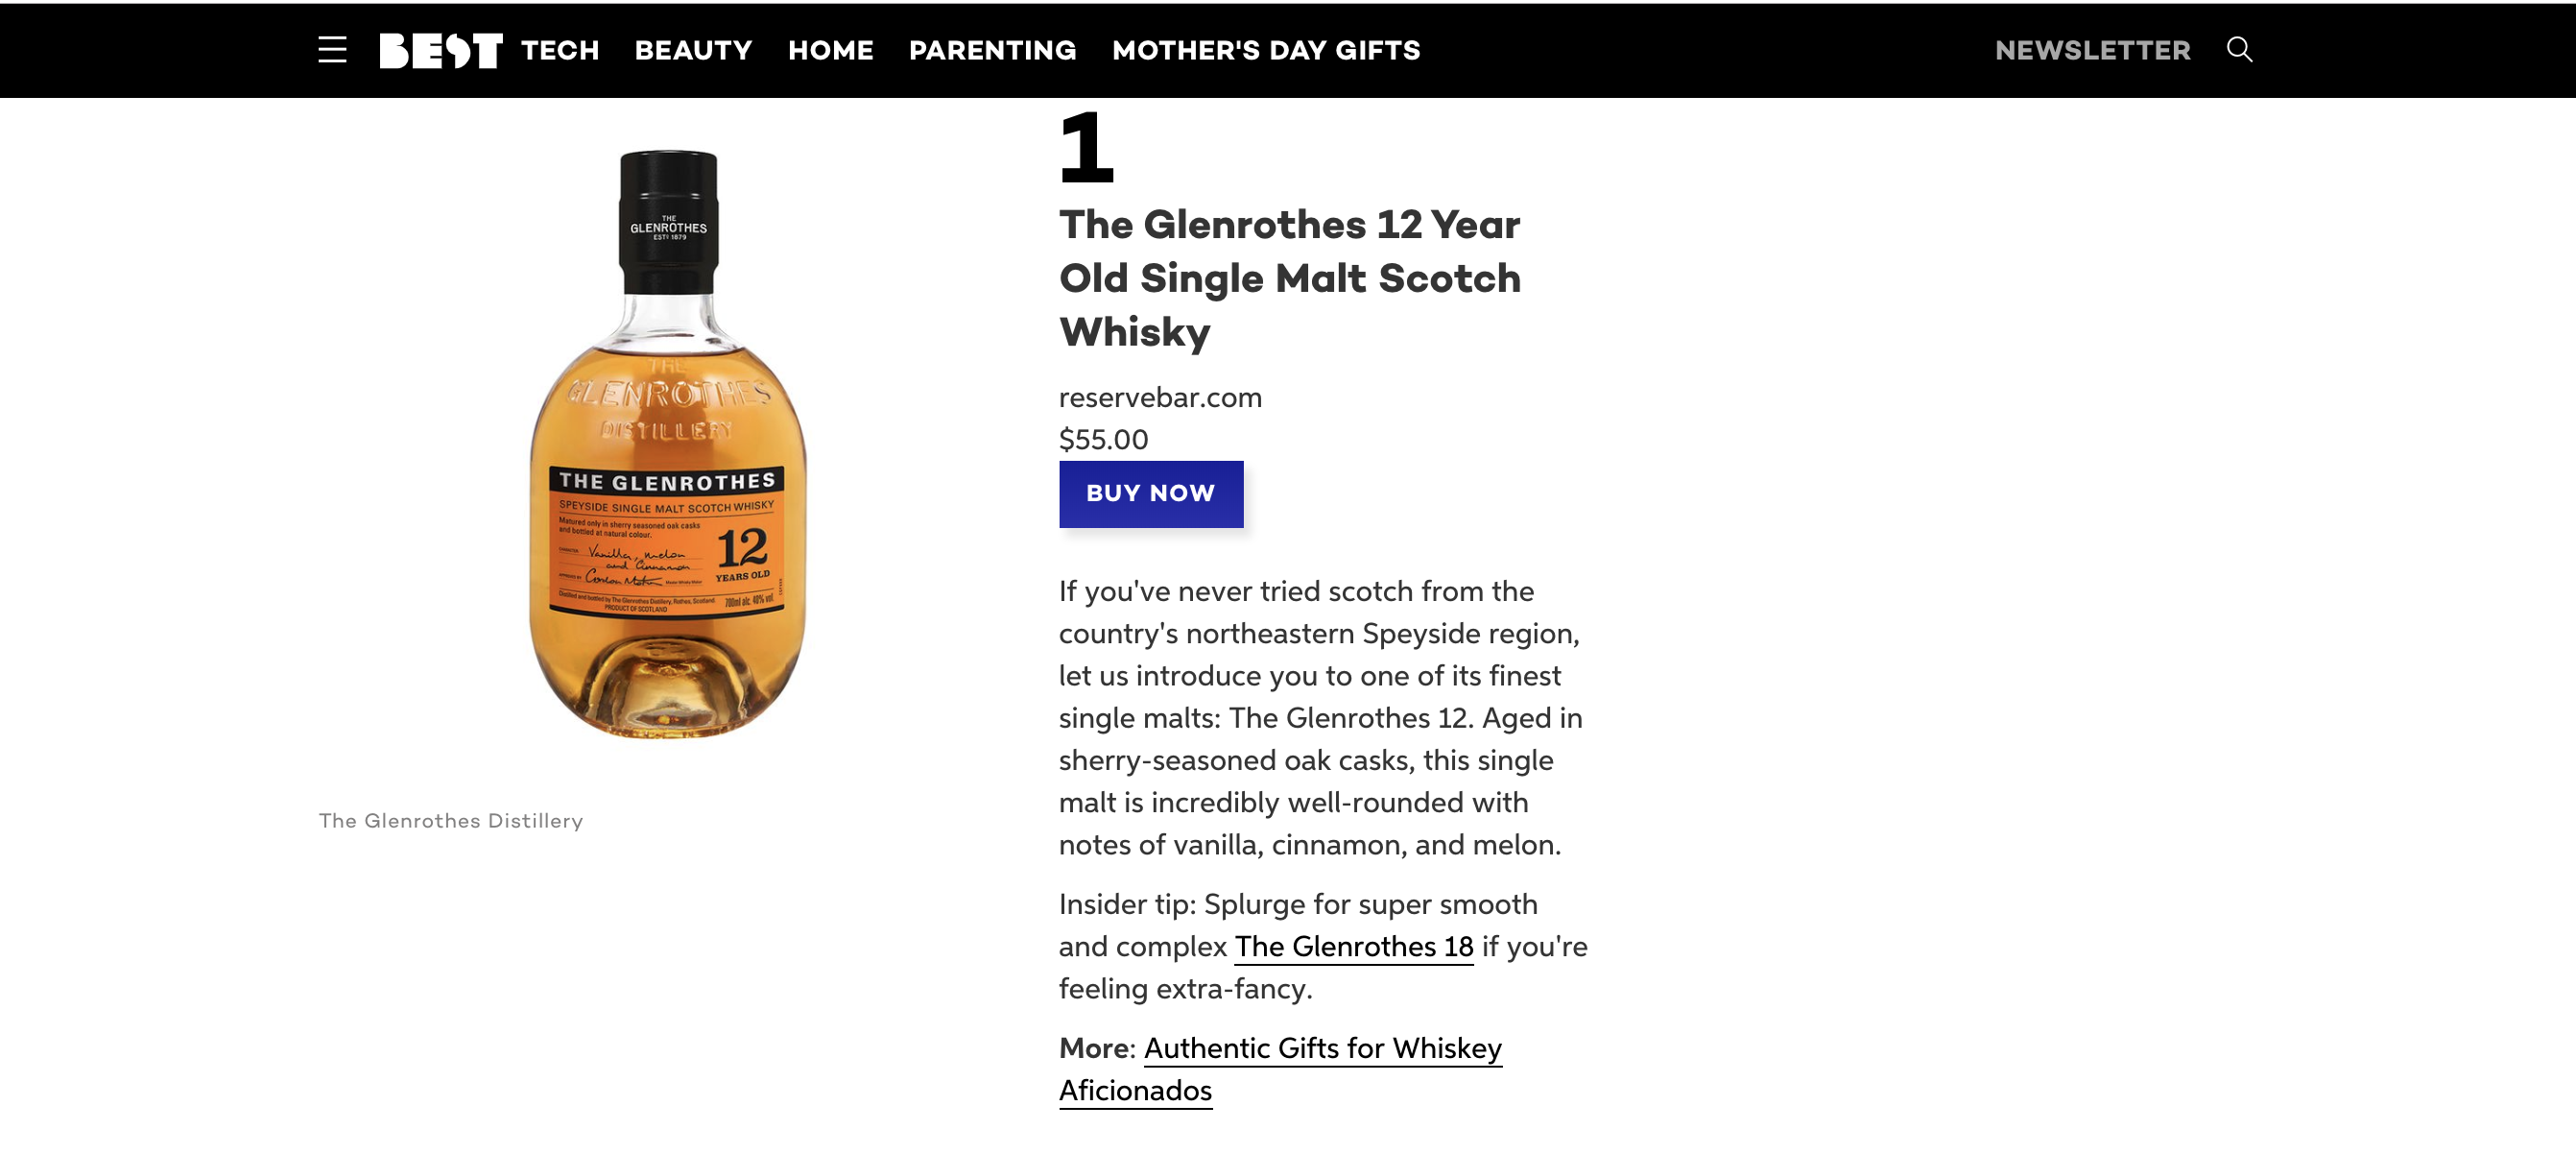 the best tech features the glenrothes